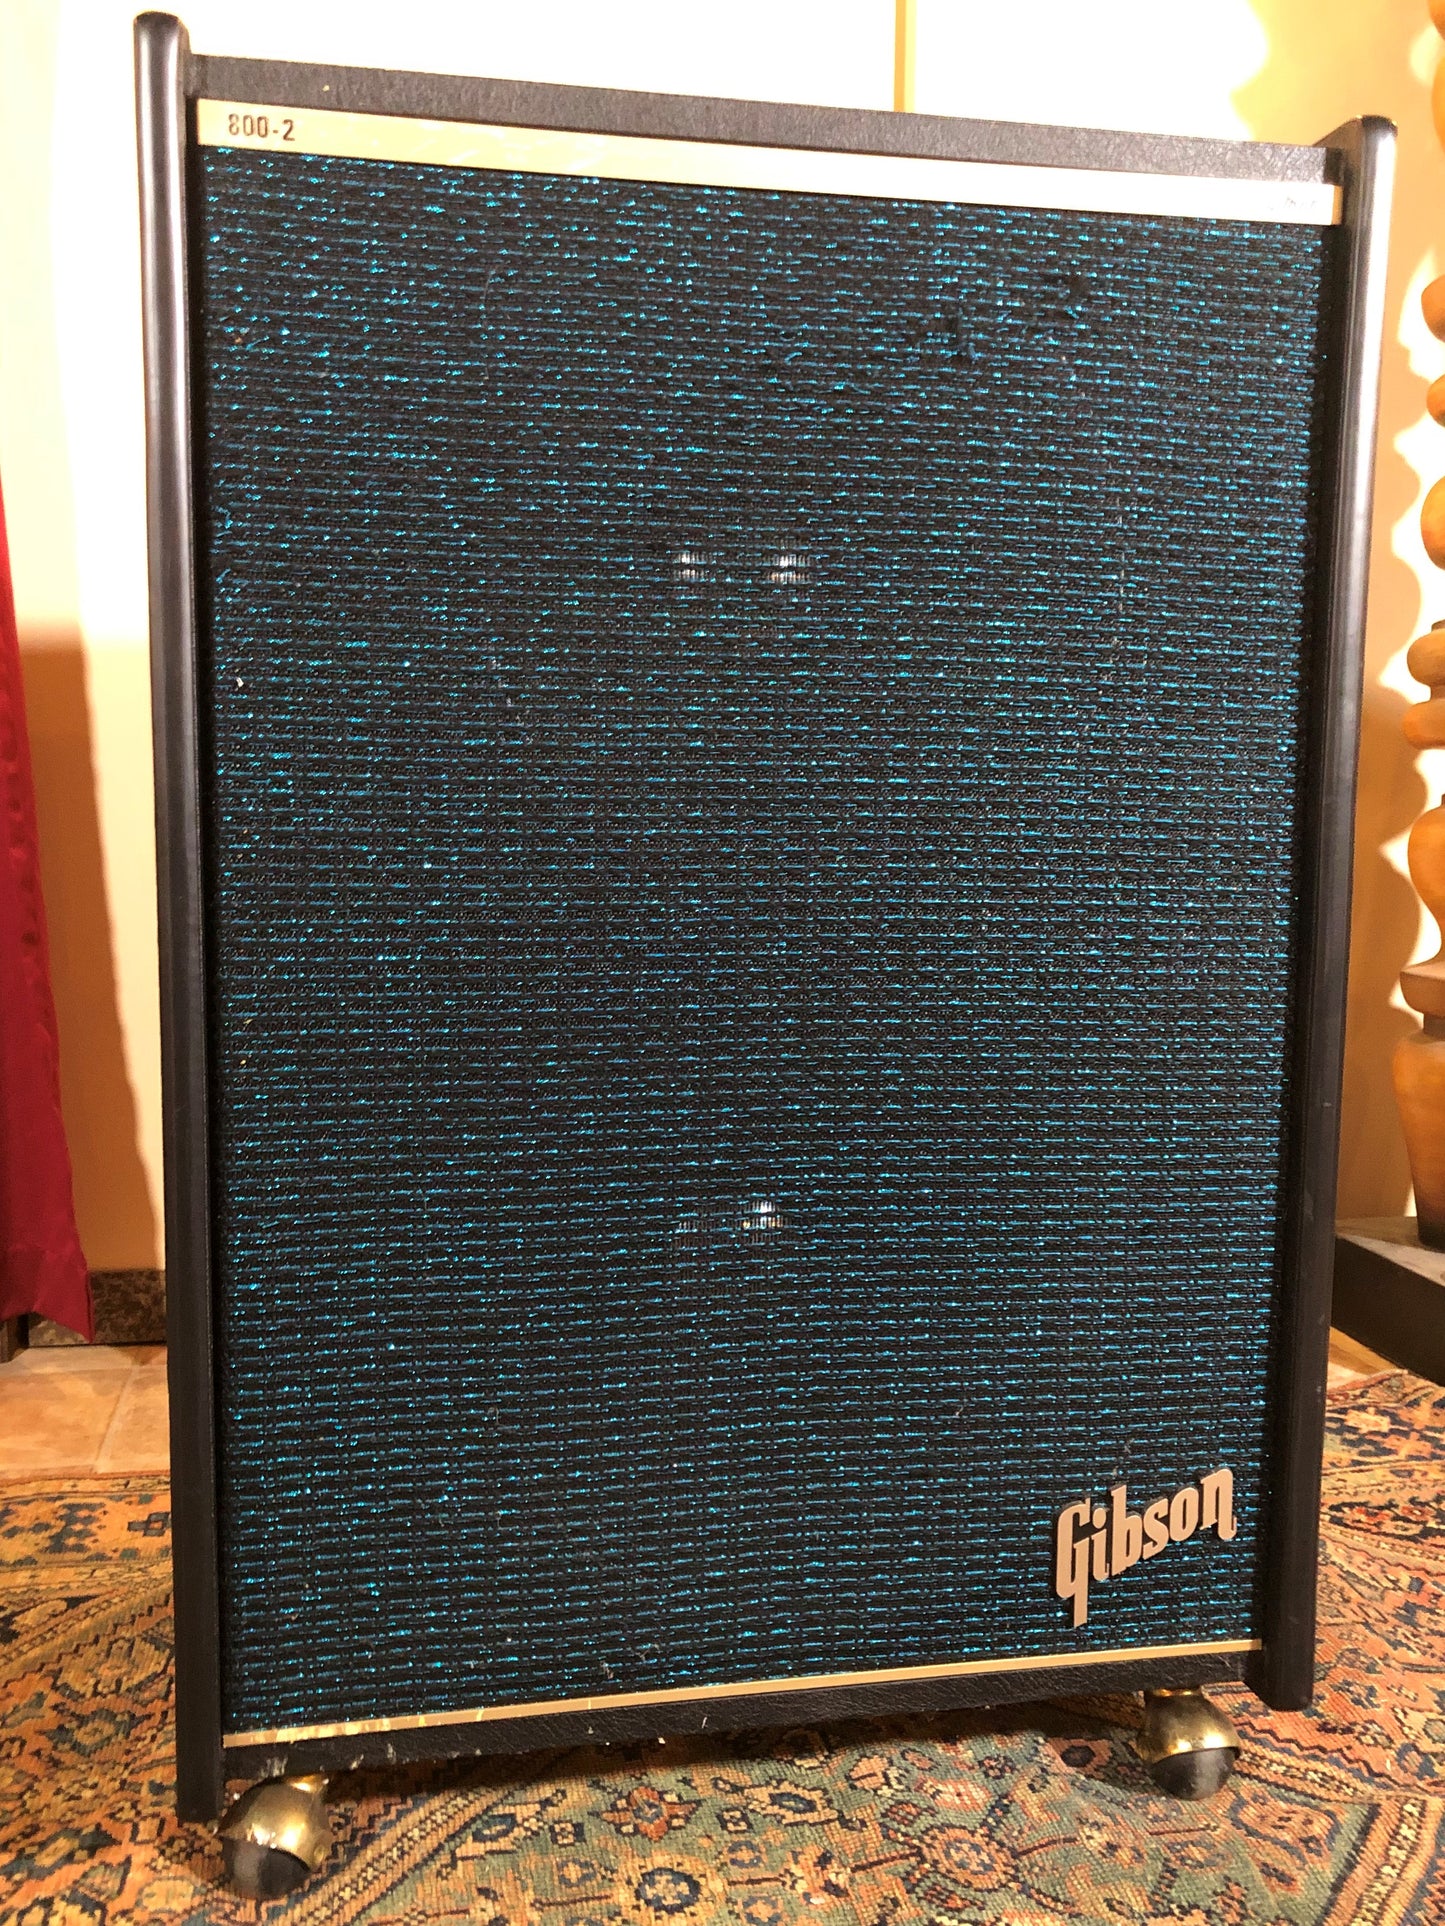 Vintage Gibson 800-2G 2x15 Powered Speaker Cabinet & Amplifier w/ Cover